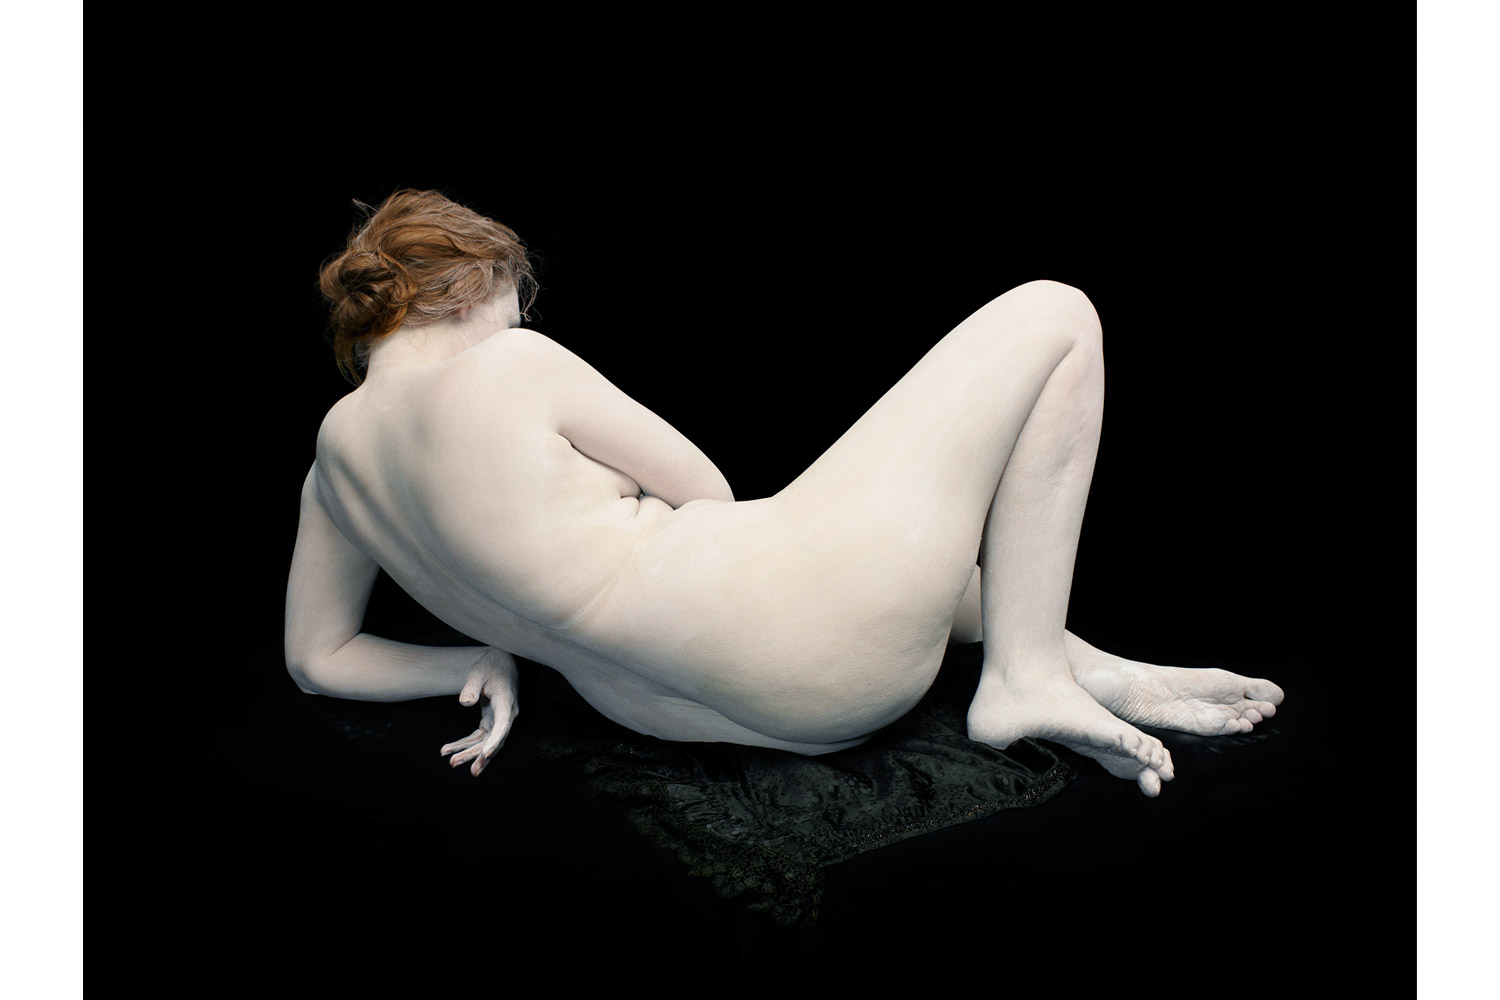 Audrey with toes and wrist bent, 2011 (Nadav Kander)